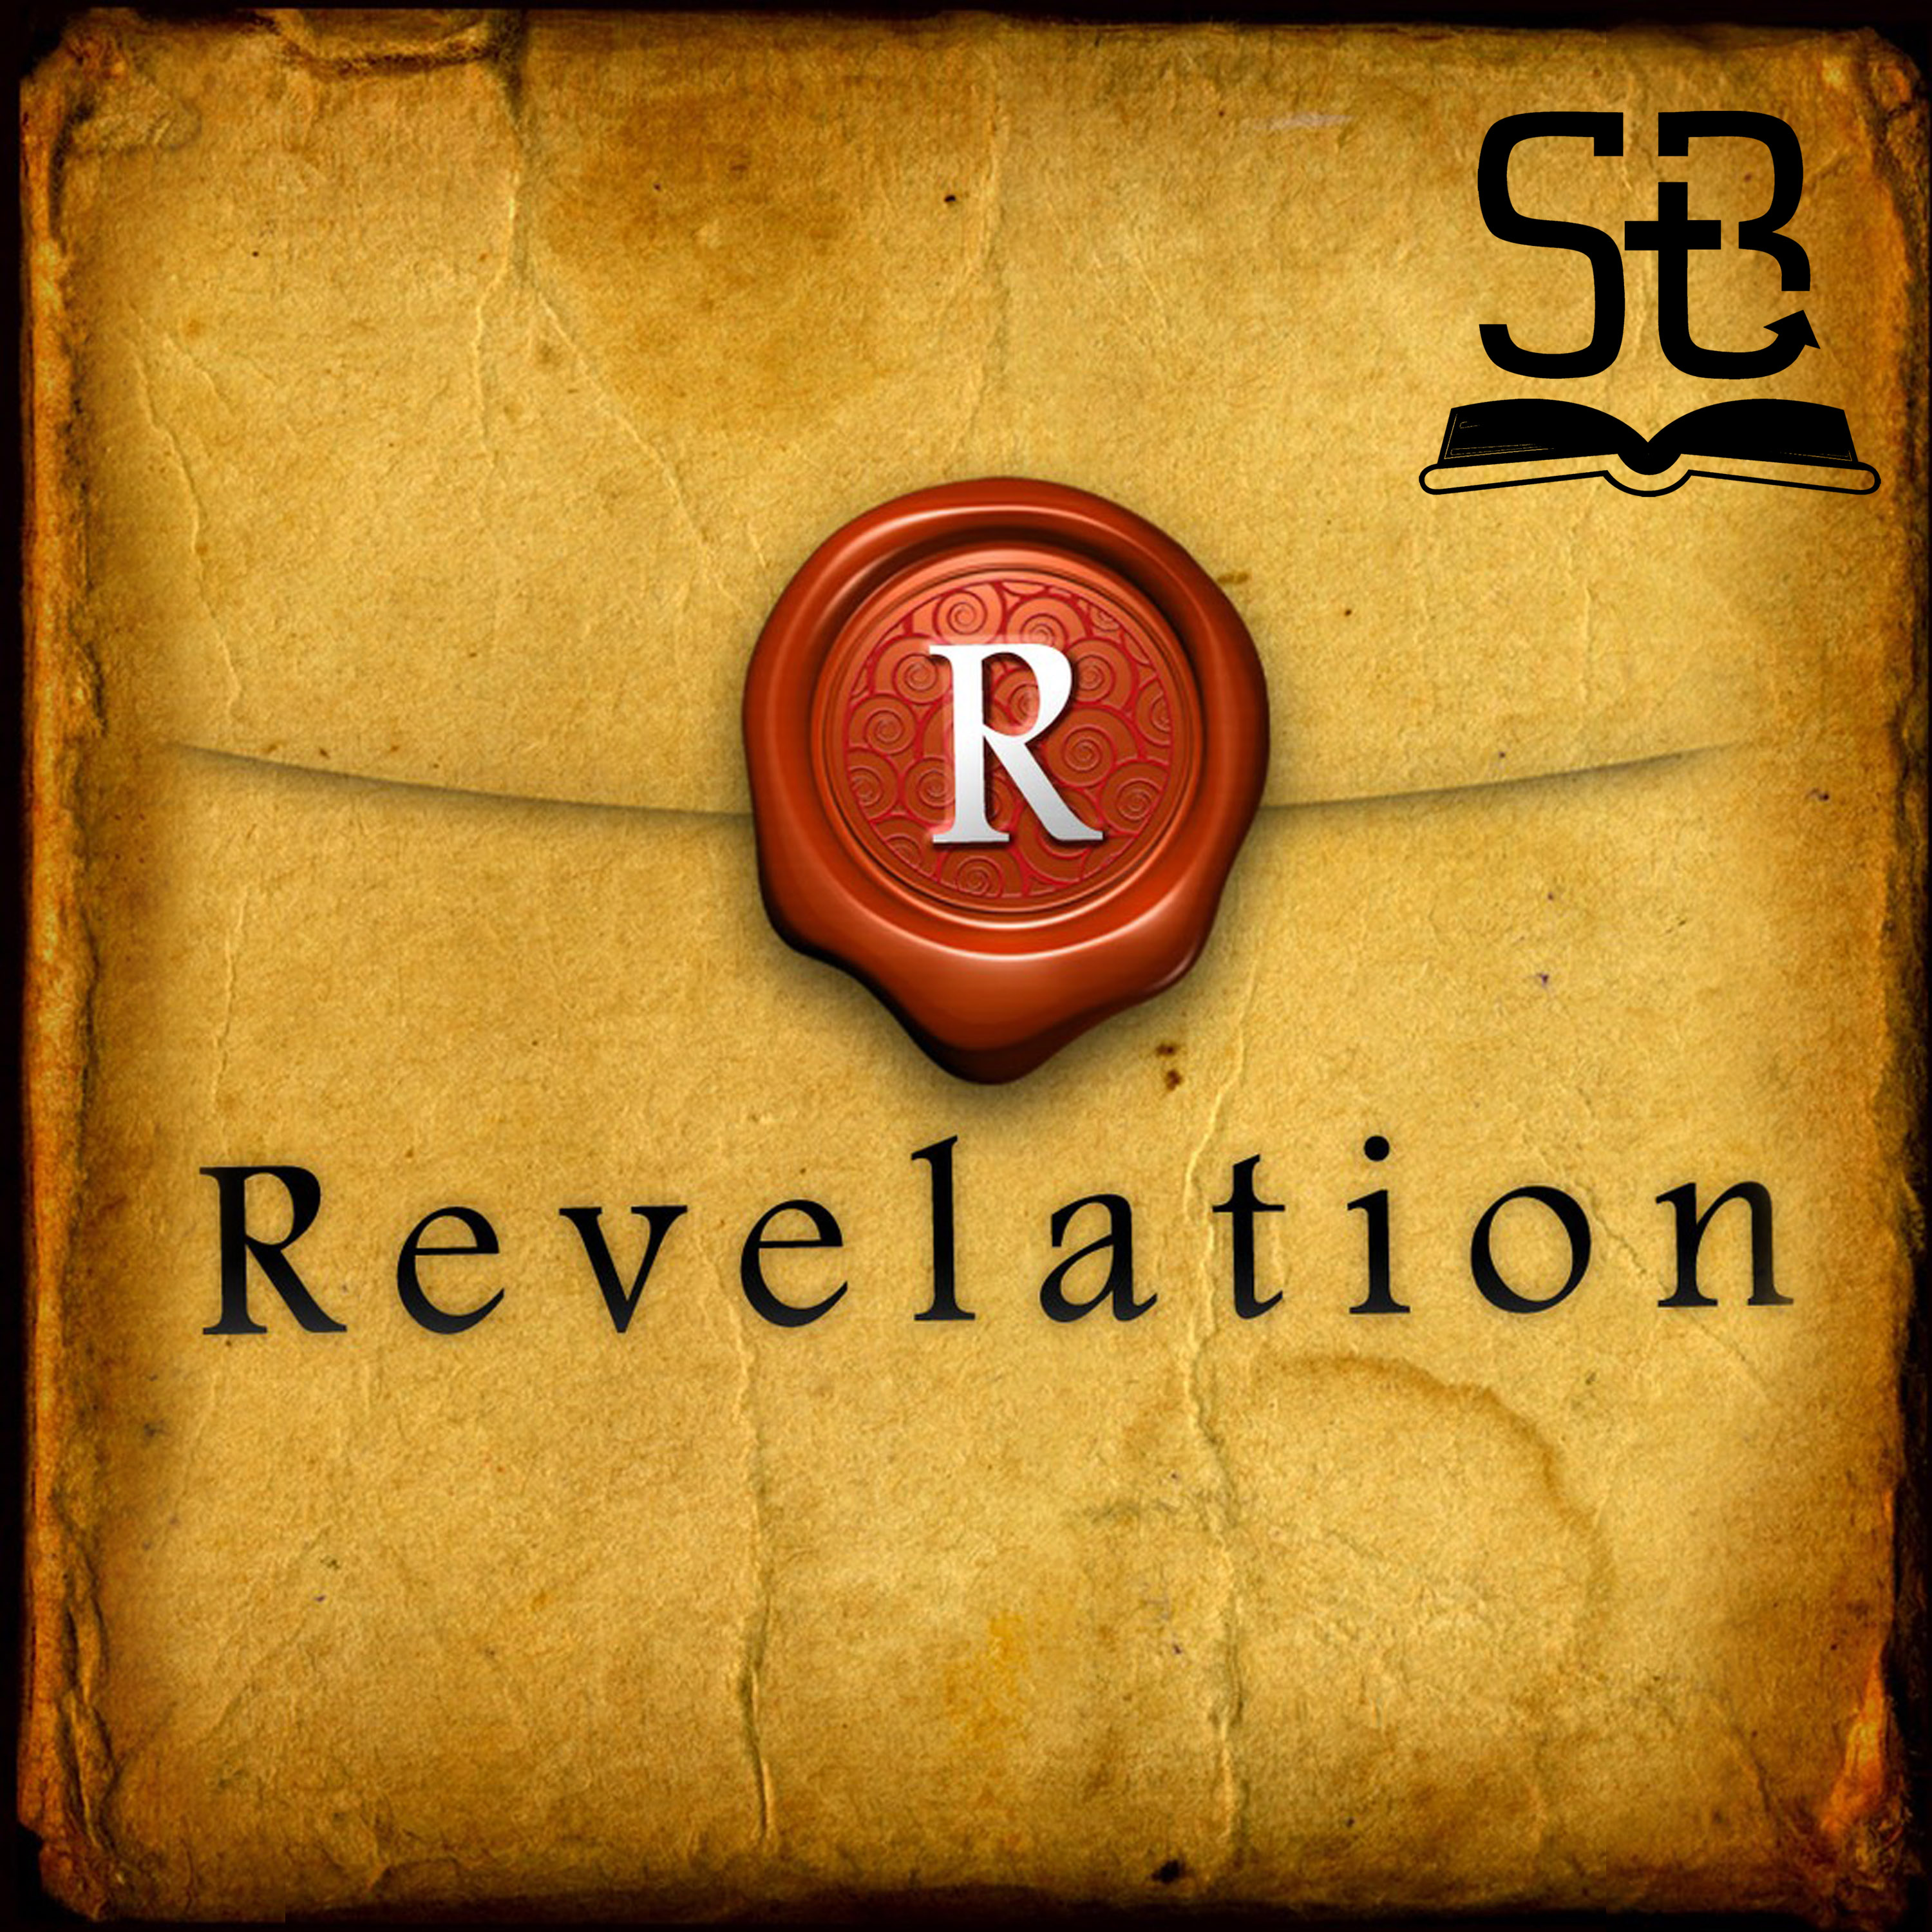 The Seven Seal Judgements, The Book of Revelation Image